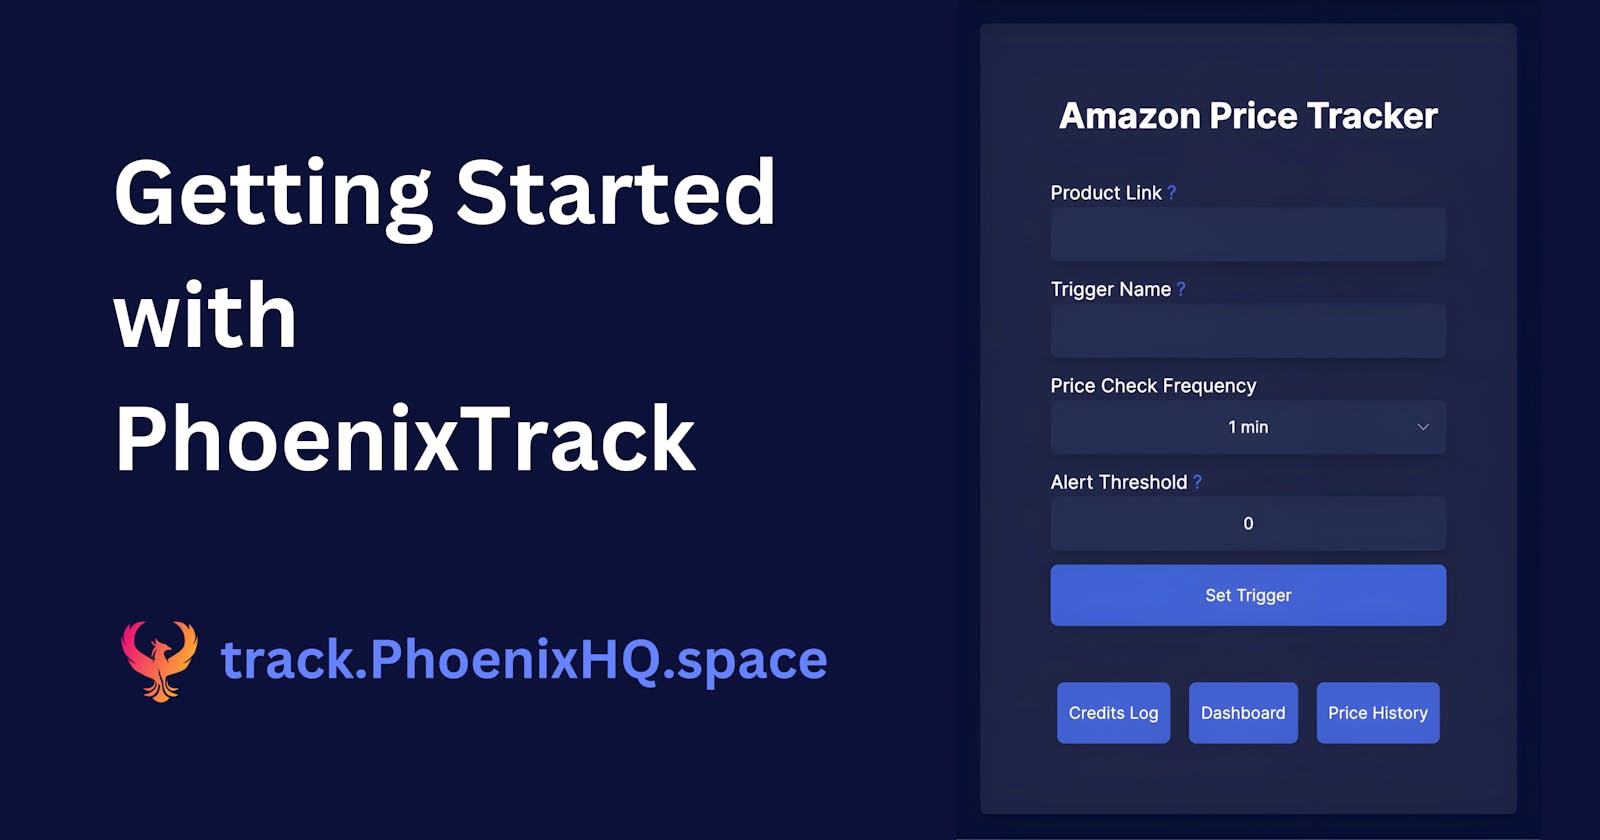 Cover Image for Getting Started with PhoenixTrack